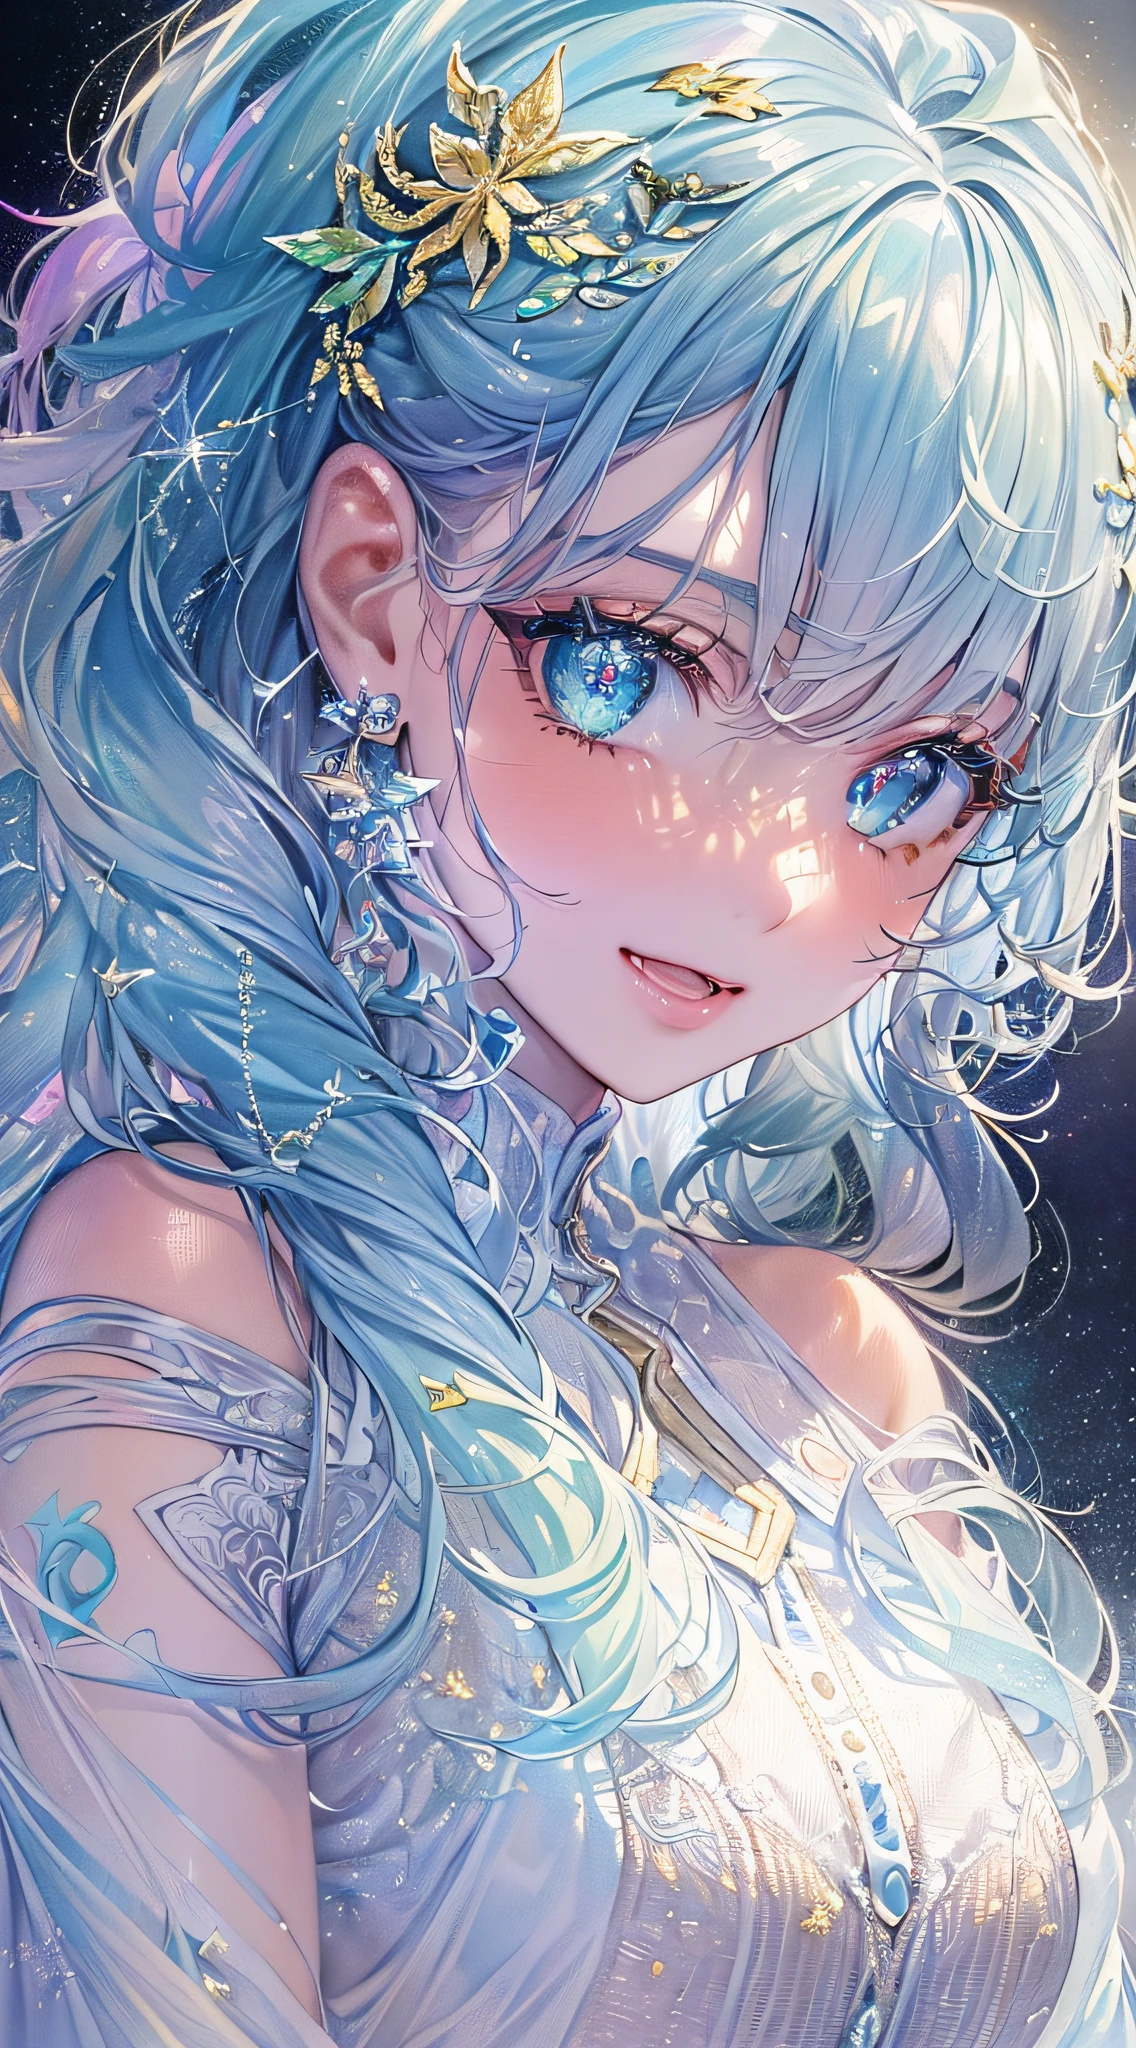 Soft Focus , (Bright gradient watercolor :1.5, Lens Flare:1.5 , Glitter :1.5), Glow , Dreamy , White background、Grid illusion, Colorful, girl、((extremely detailed eye:1.5)),((Face Zoom:1.5)),((Face Focus:1.5)),(((​masterpiece、top-quality、top-quality、watercolor paiting)))(Curly)、Official art、Beautifully Aesthetic:1.2)、eye glass:1.5、(4girl:1.5)、(Fractal Art:1.3)、The upper part of the body、colourfull、((Ultra-detailed retina:1.5))、embarrassed from、(Midriff)、((Super Detail Eyes:1.5))、(rainbow-colored hair、colourful hair、Half blue and half light blue hair:1.5)、((the Extremely Detailed CG Unity 8K Wallpapers、​masterpiece、top-quality))、((ultra-detailliert:1.2))、(The best lighting、Best Shadows、extremely delicate and beautiful)、(the Extremely Detailed CG Unity 8K Wallpapers、​masterpiece、best qualtiy、ultra-detailliert)、(The best lighting、Best Shadows、extremely delicate and beautiful)、(the perfect body:1.5)、((Wow Writing High School Uniforms:1.5)),{{{{Dazzling brilliance}}}}、Rainbow Bridge、(masutepiece:1.2), Best Quality, (Illustration:1.2), (Ultra-detailed), hyperdetails, (delicate detailed), (Intricate details), (Cinematic Light, best quality backlight), solo women, Perfect body, (4girl), (Best Illumination, extremely delicate and beautiful), Cinematic Light、【emblem:Irridescent color 】、Blue sky with white angel wings proportional to body、Sunnyday